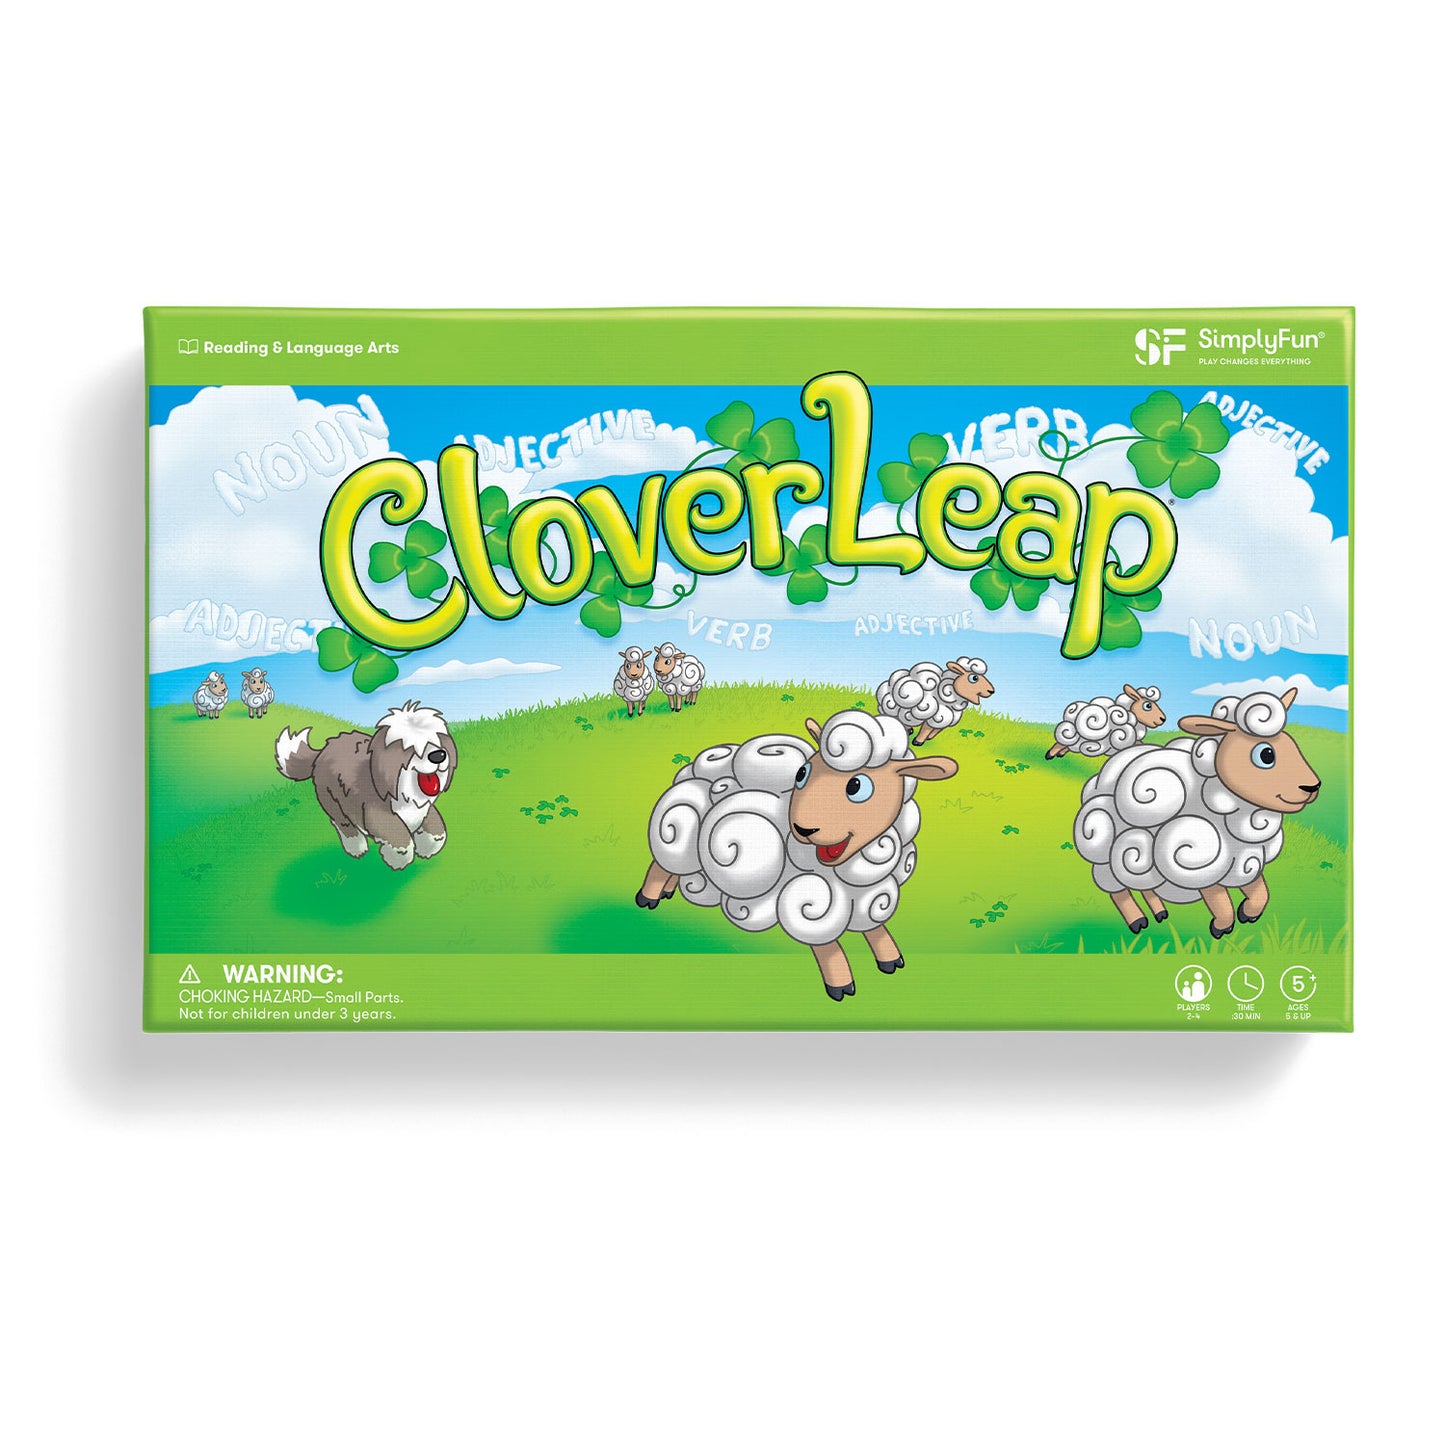 Clover Leap by SimplyFun is a vocabulary and sentence structure game for ages 5 and up